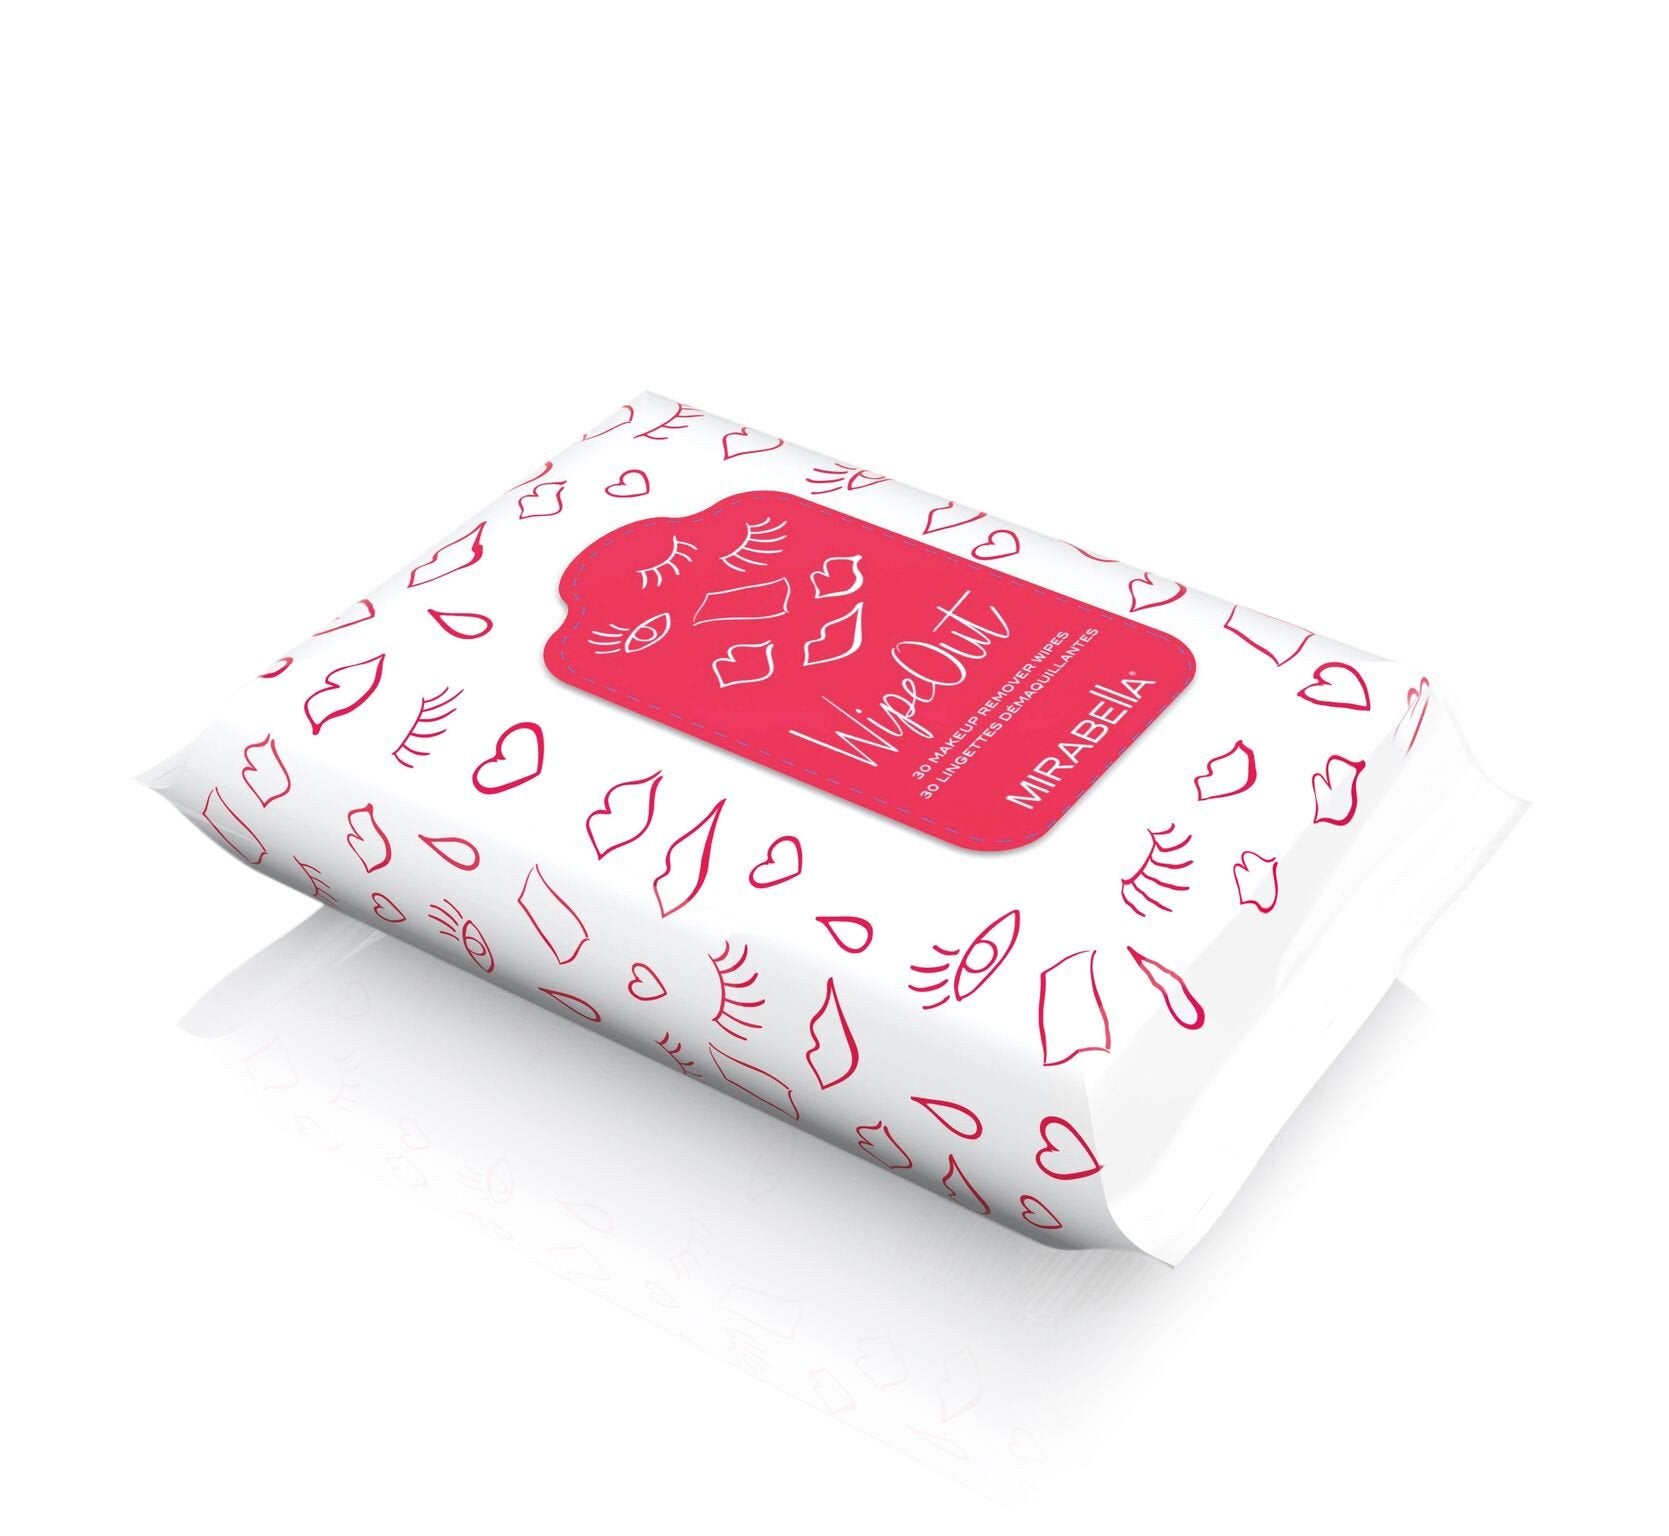 Mirabella Wipe Out Makeup Remover Wipes (30 Wipes) - ADDROS.COM